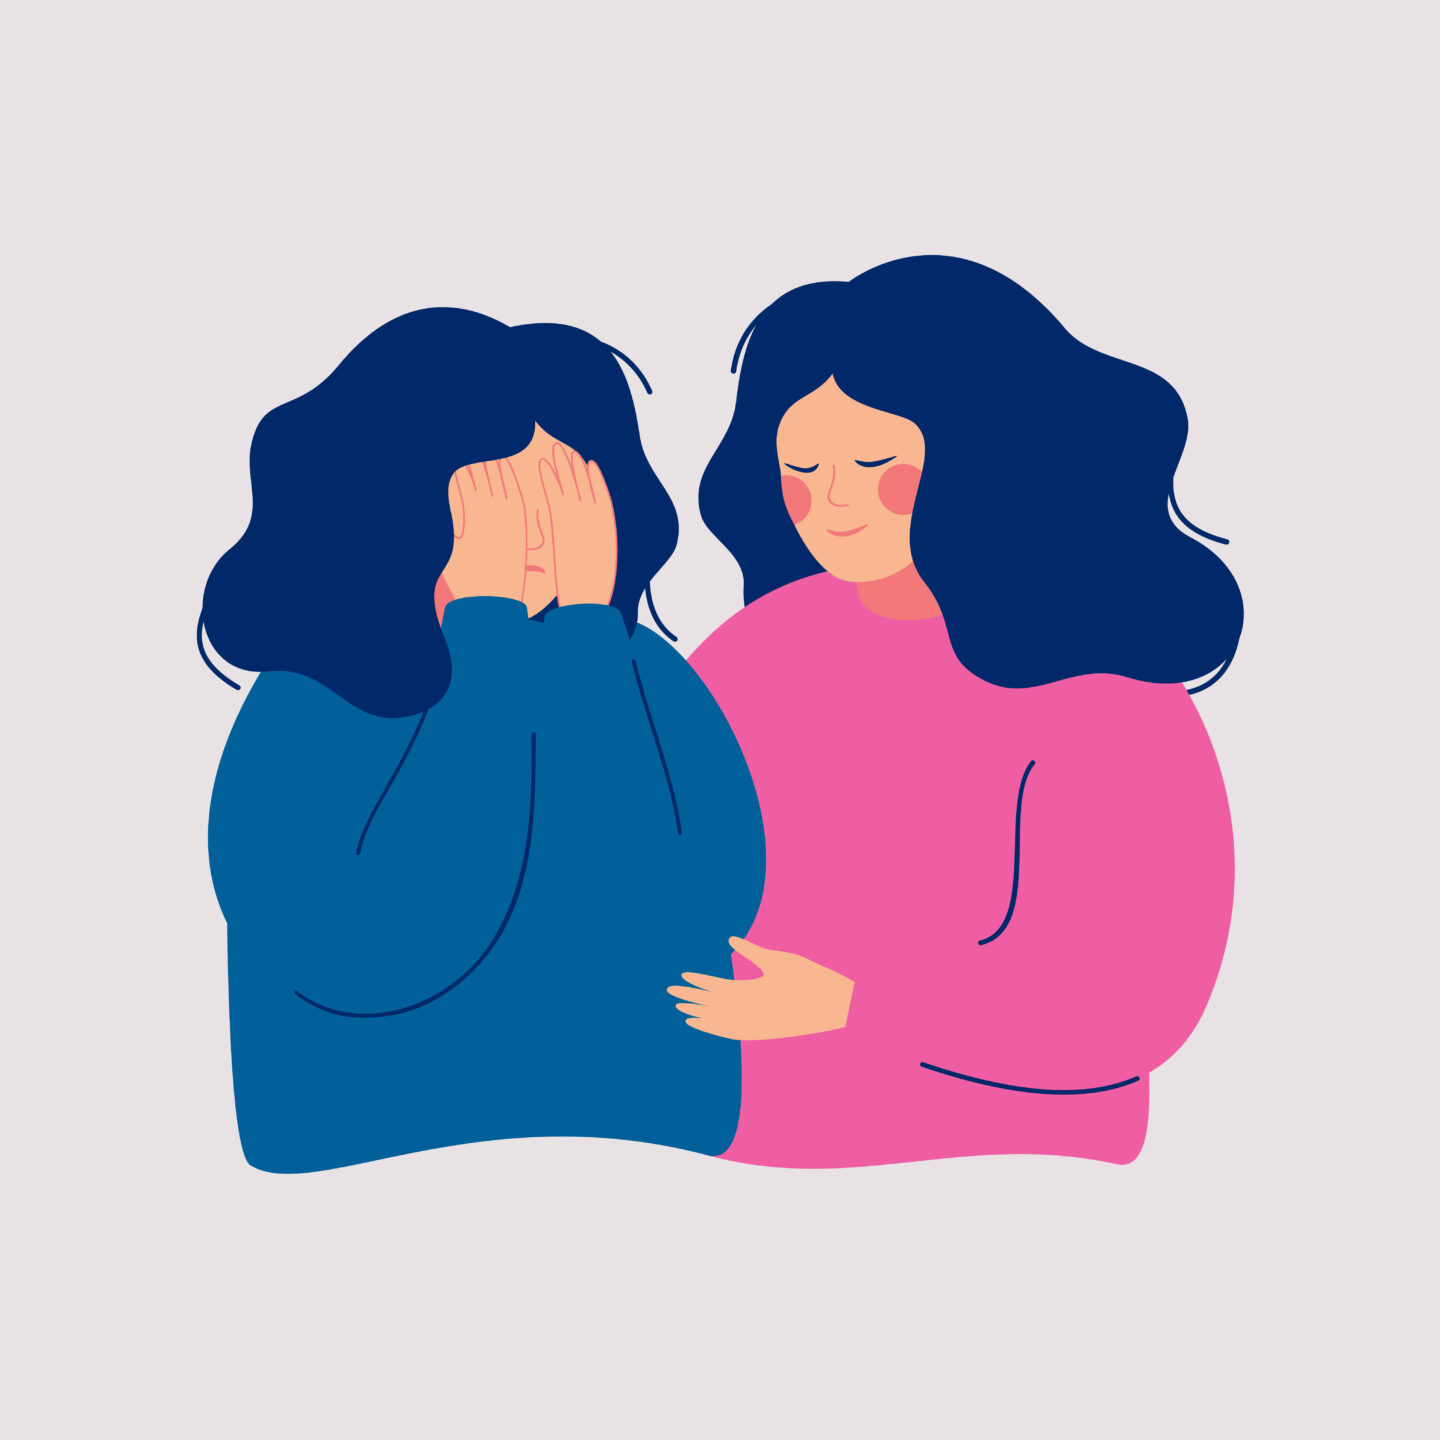 Young woman comforting her crying friend illustration